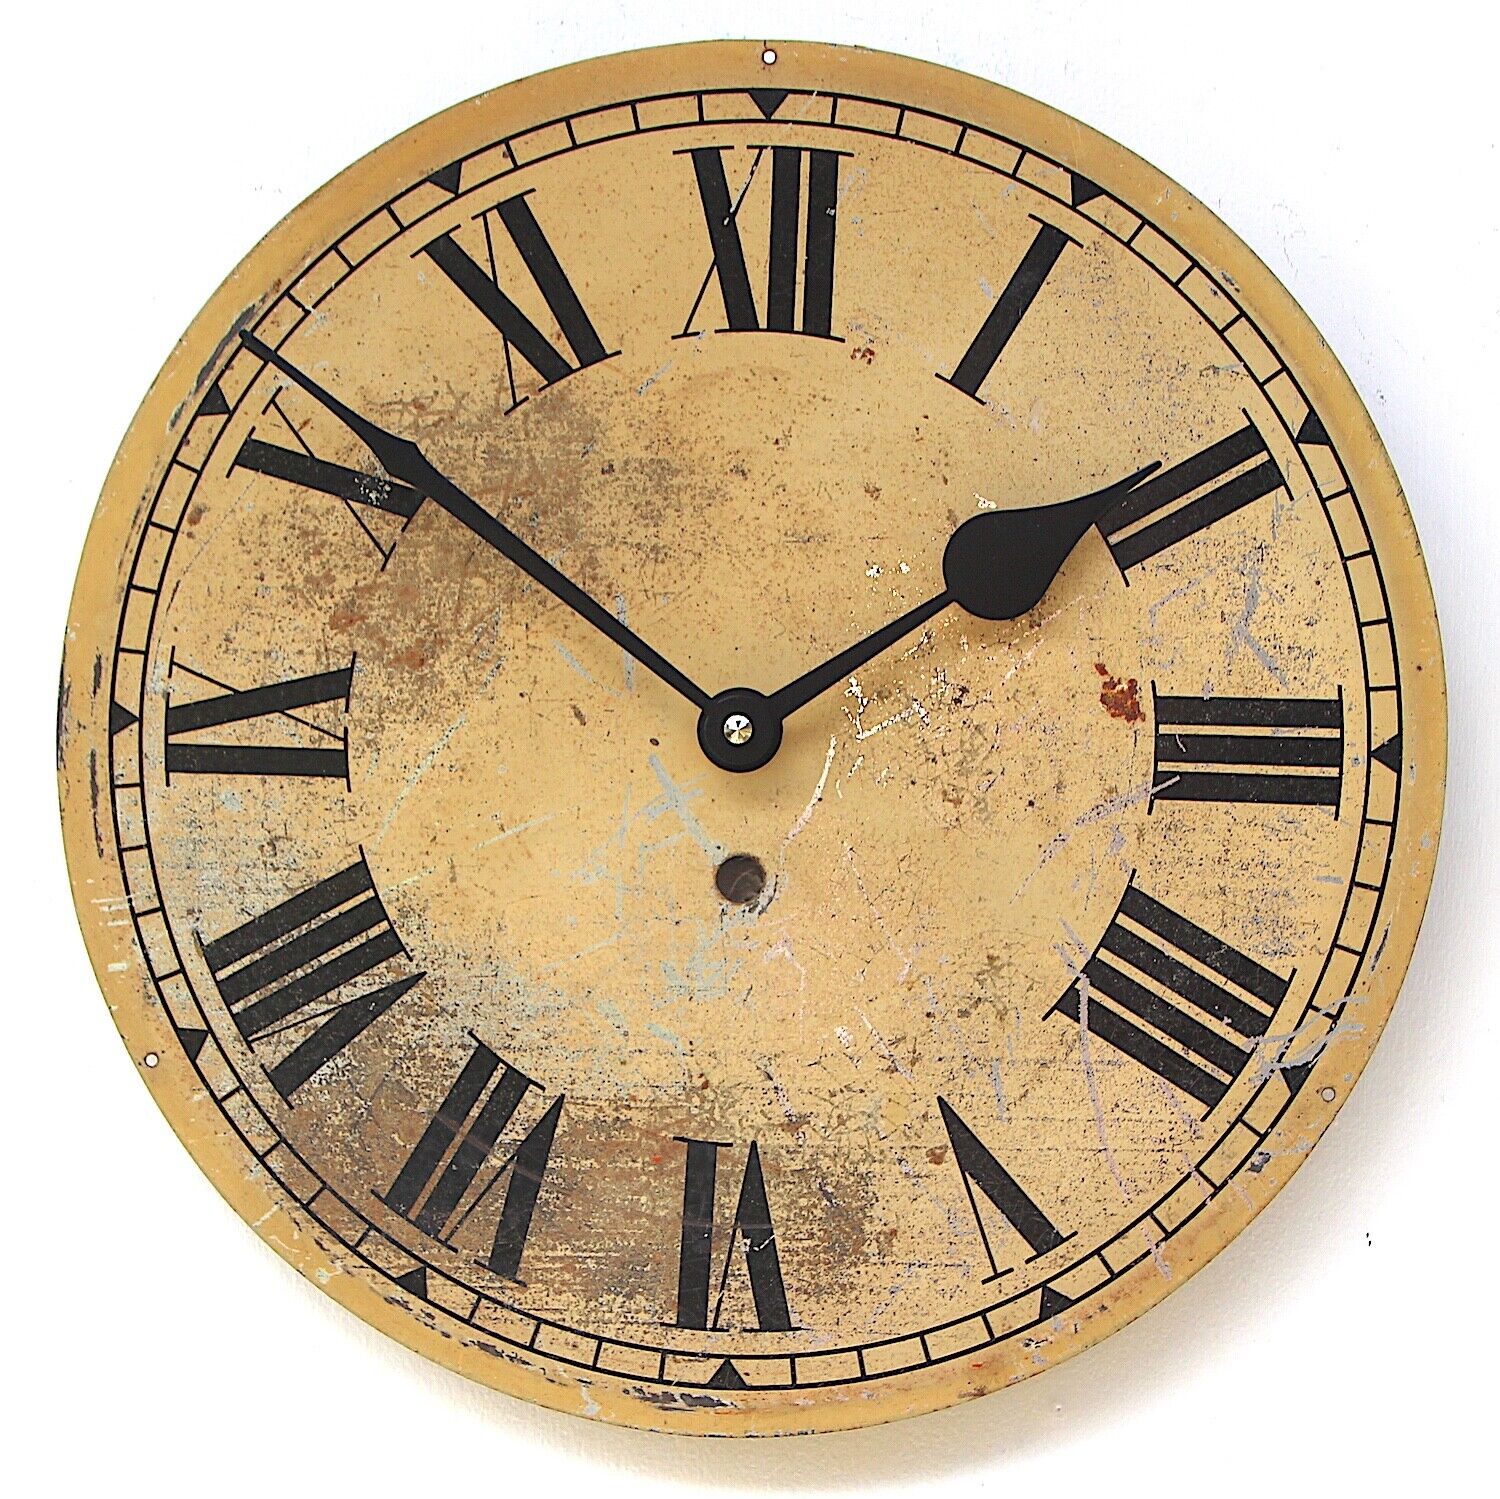 Original early 20th century railway/waiting room style vintage clock dial/face.